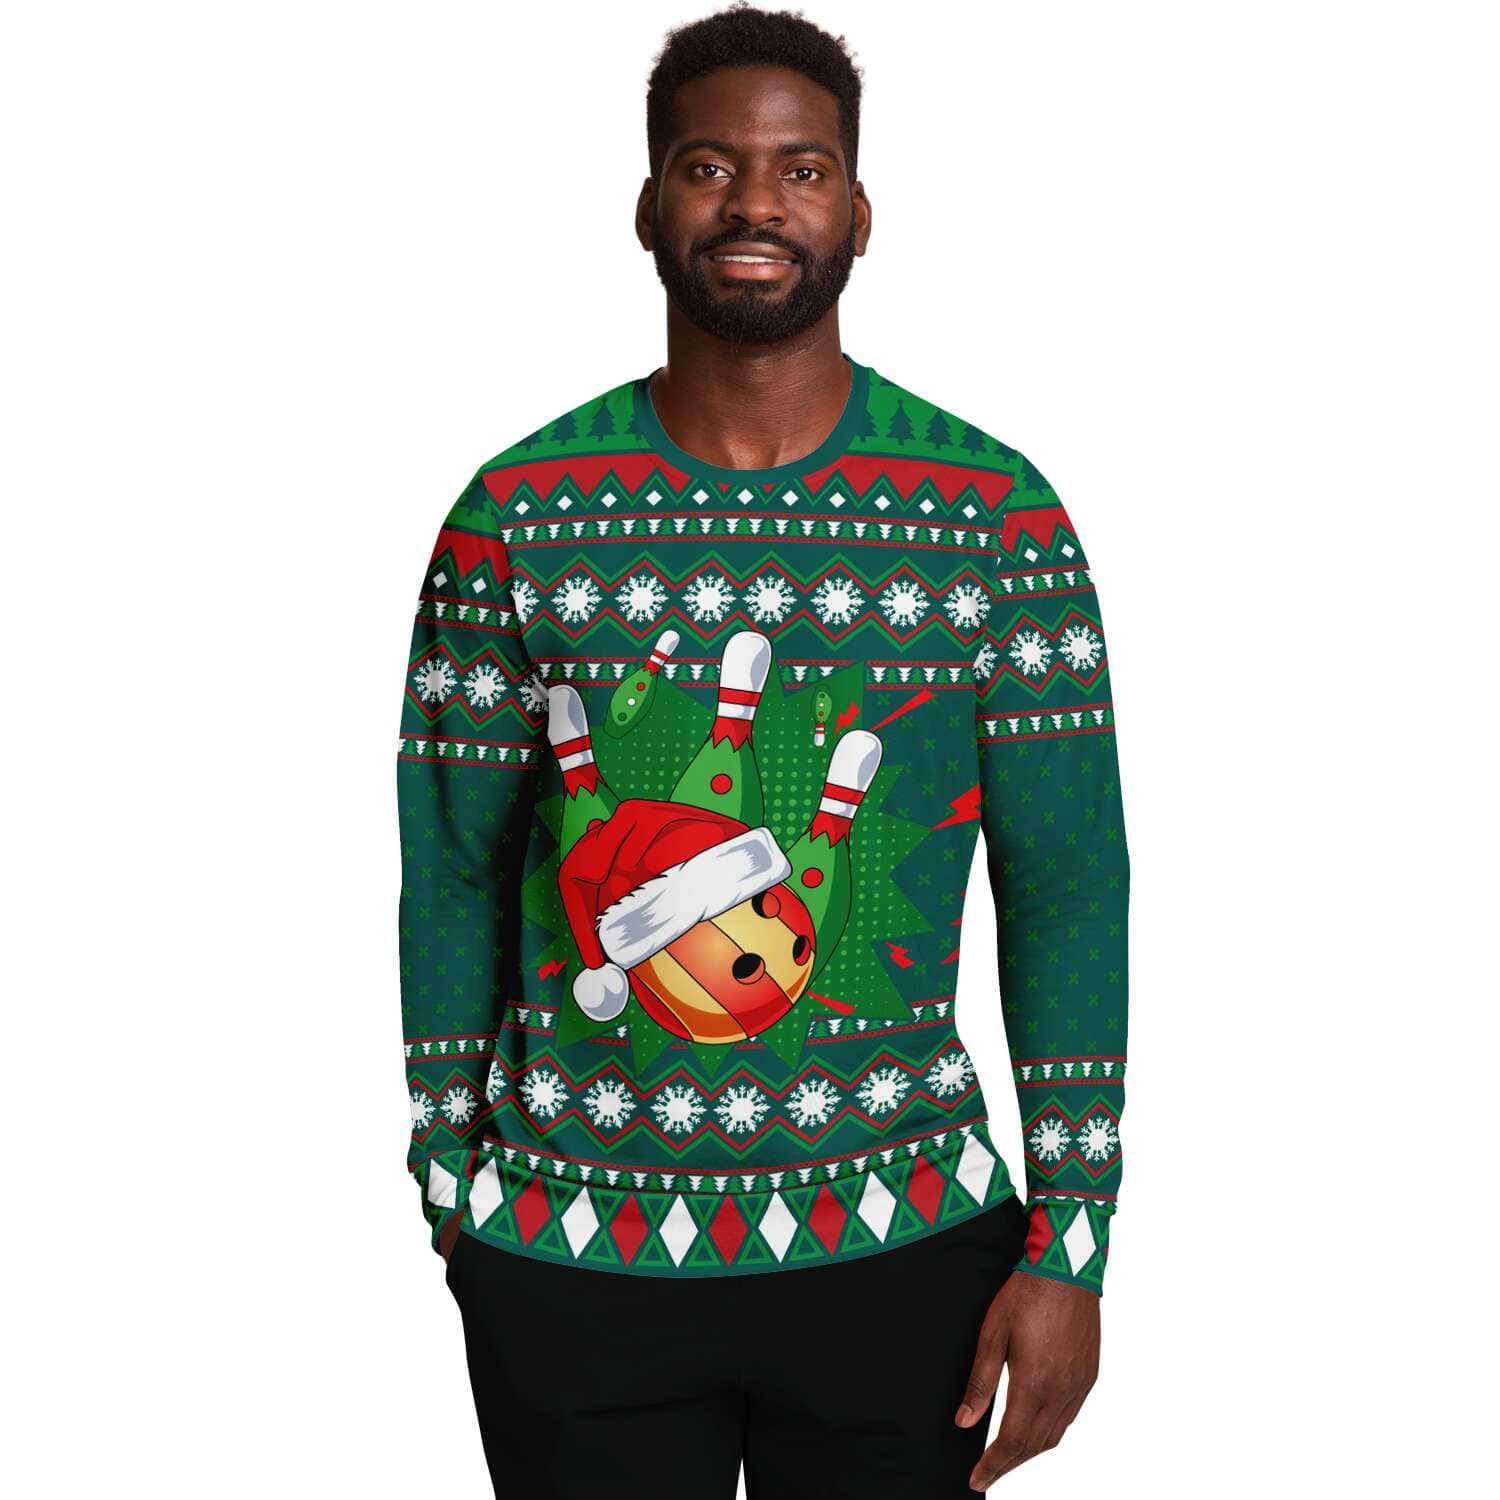 Where To Buy Ugly Christmas Sweaters Nyc?